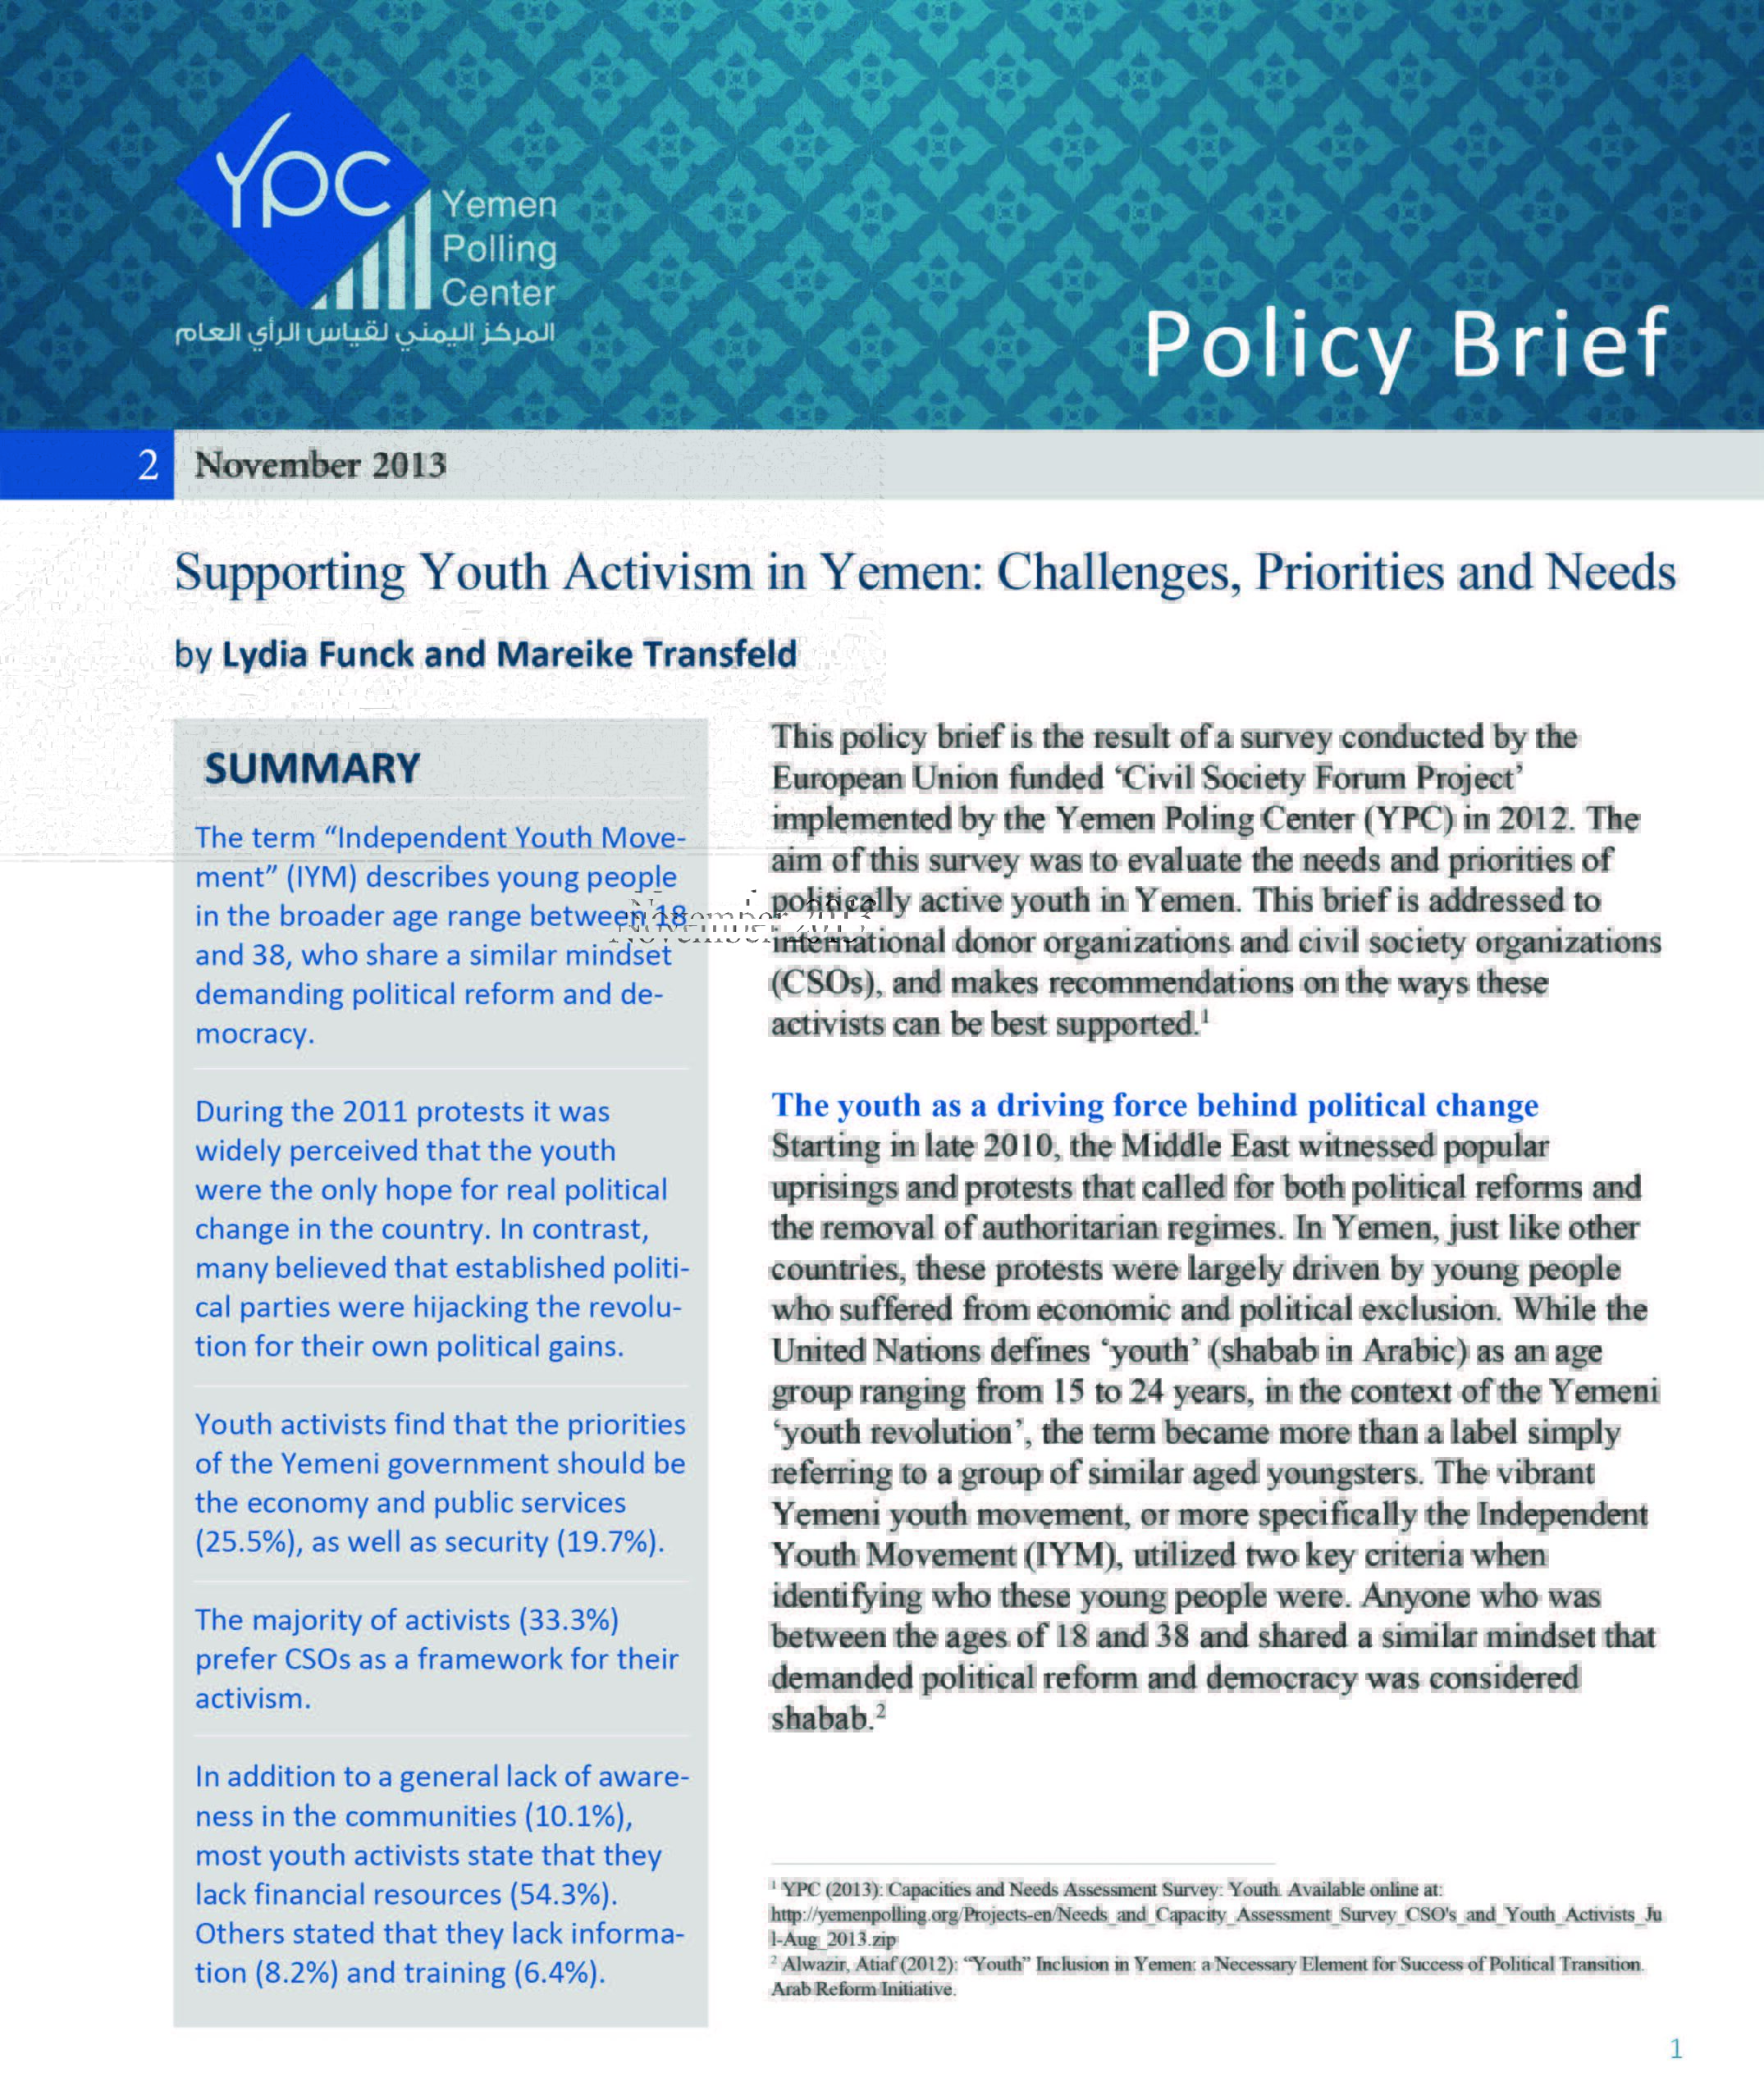 YPCPublications_Policy-Brief-Supporting-Youth-Activism-in-Yemen-Challenges-Priorities-and-Needs